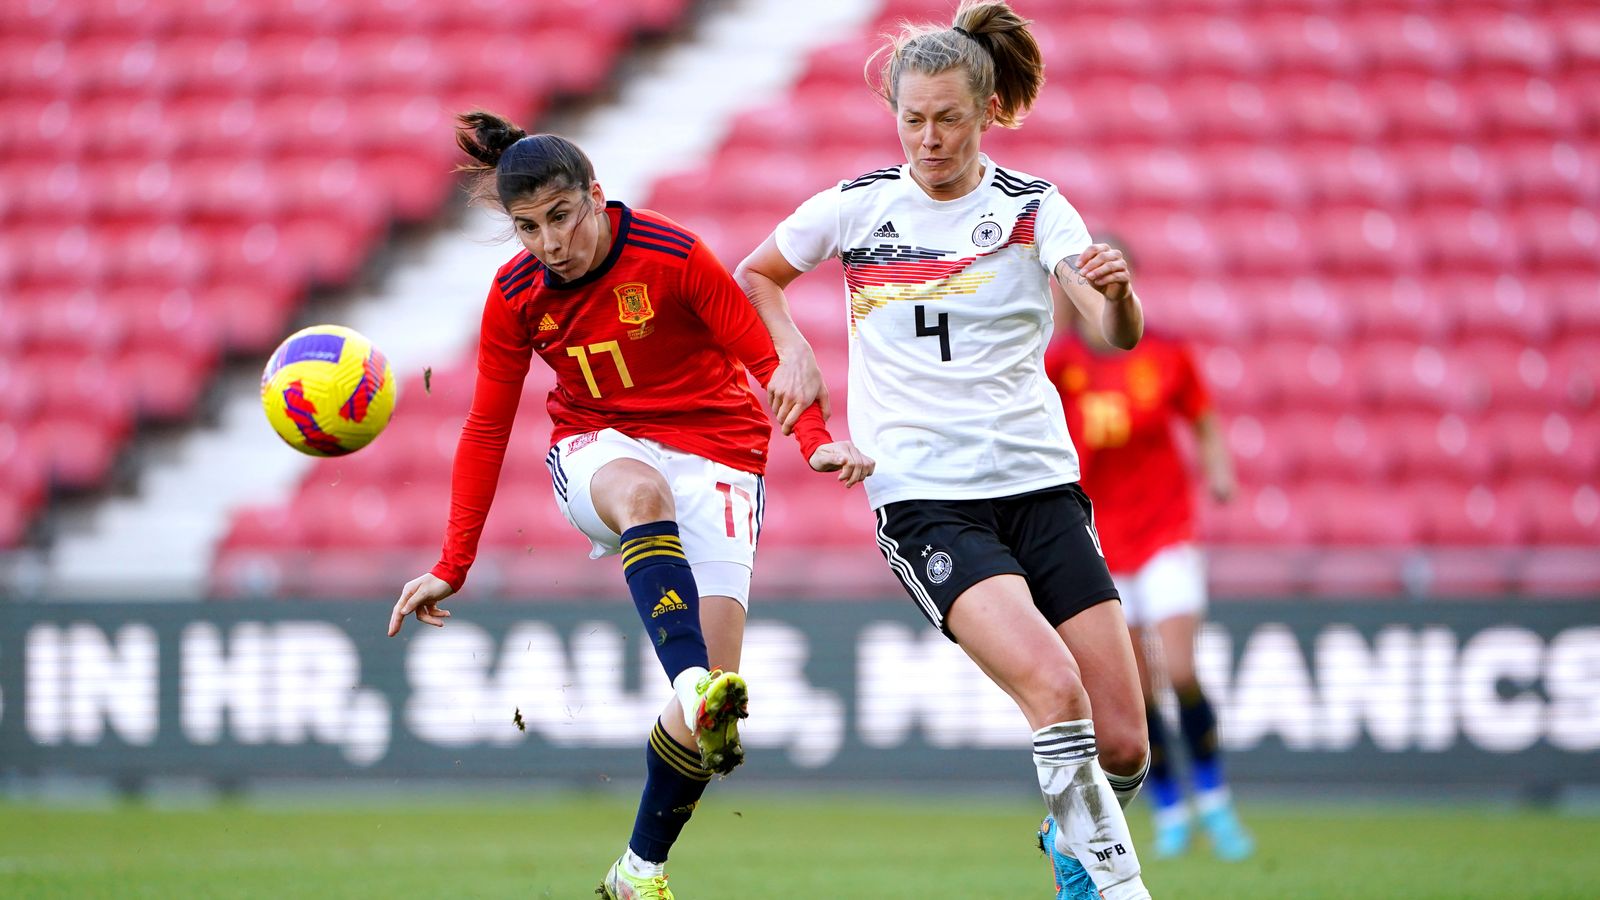 Women’s Euros 2022 preview: Spain and Germany begin their campaigns in Group B